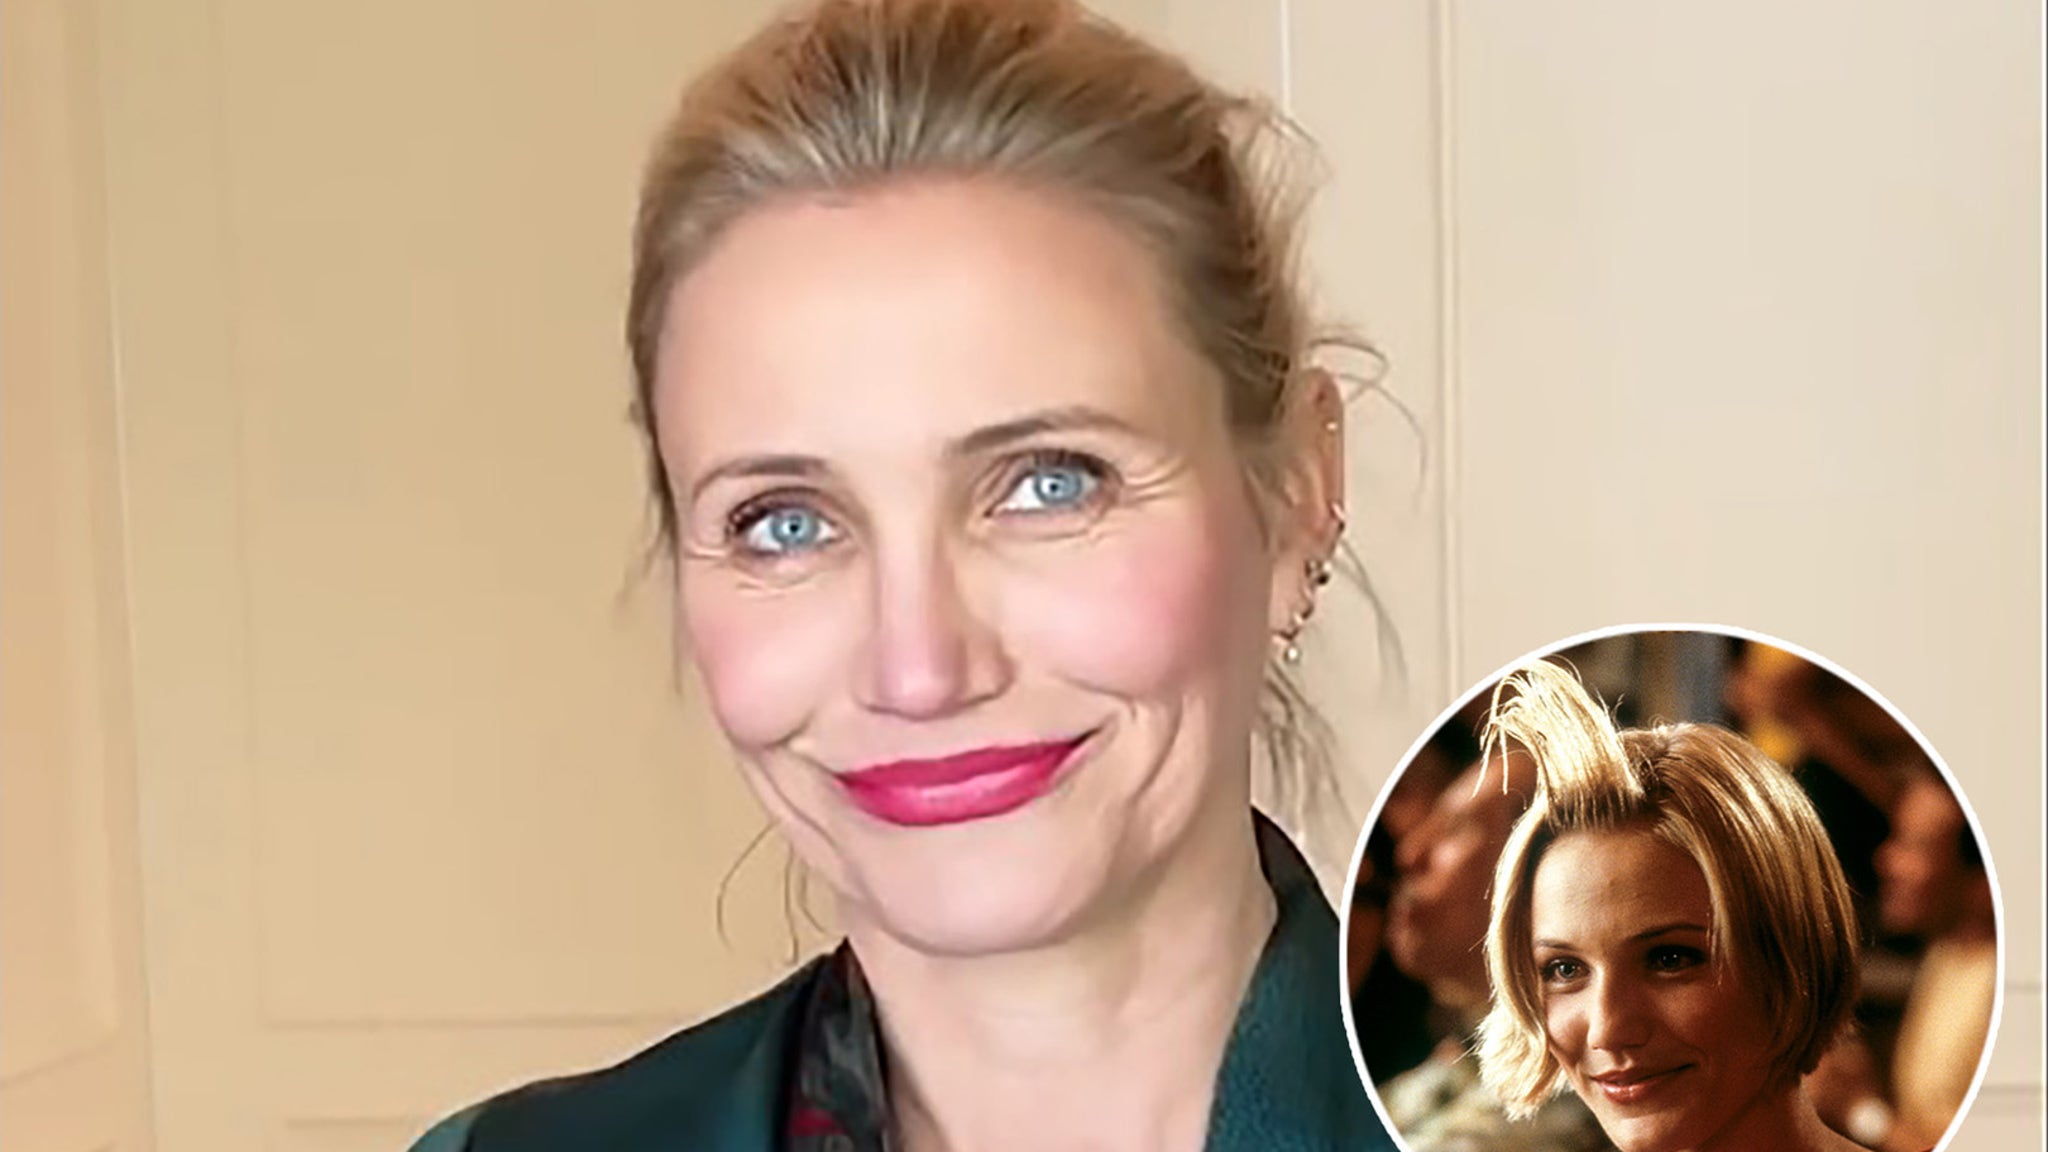 Cameron Diaz Recreates Classic There's Something About Mary 'Hair Gel' Scene  in New Instagram